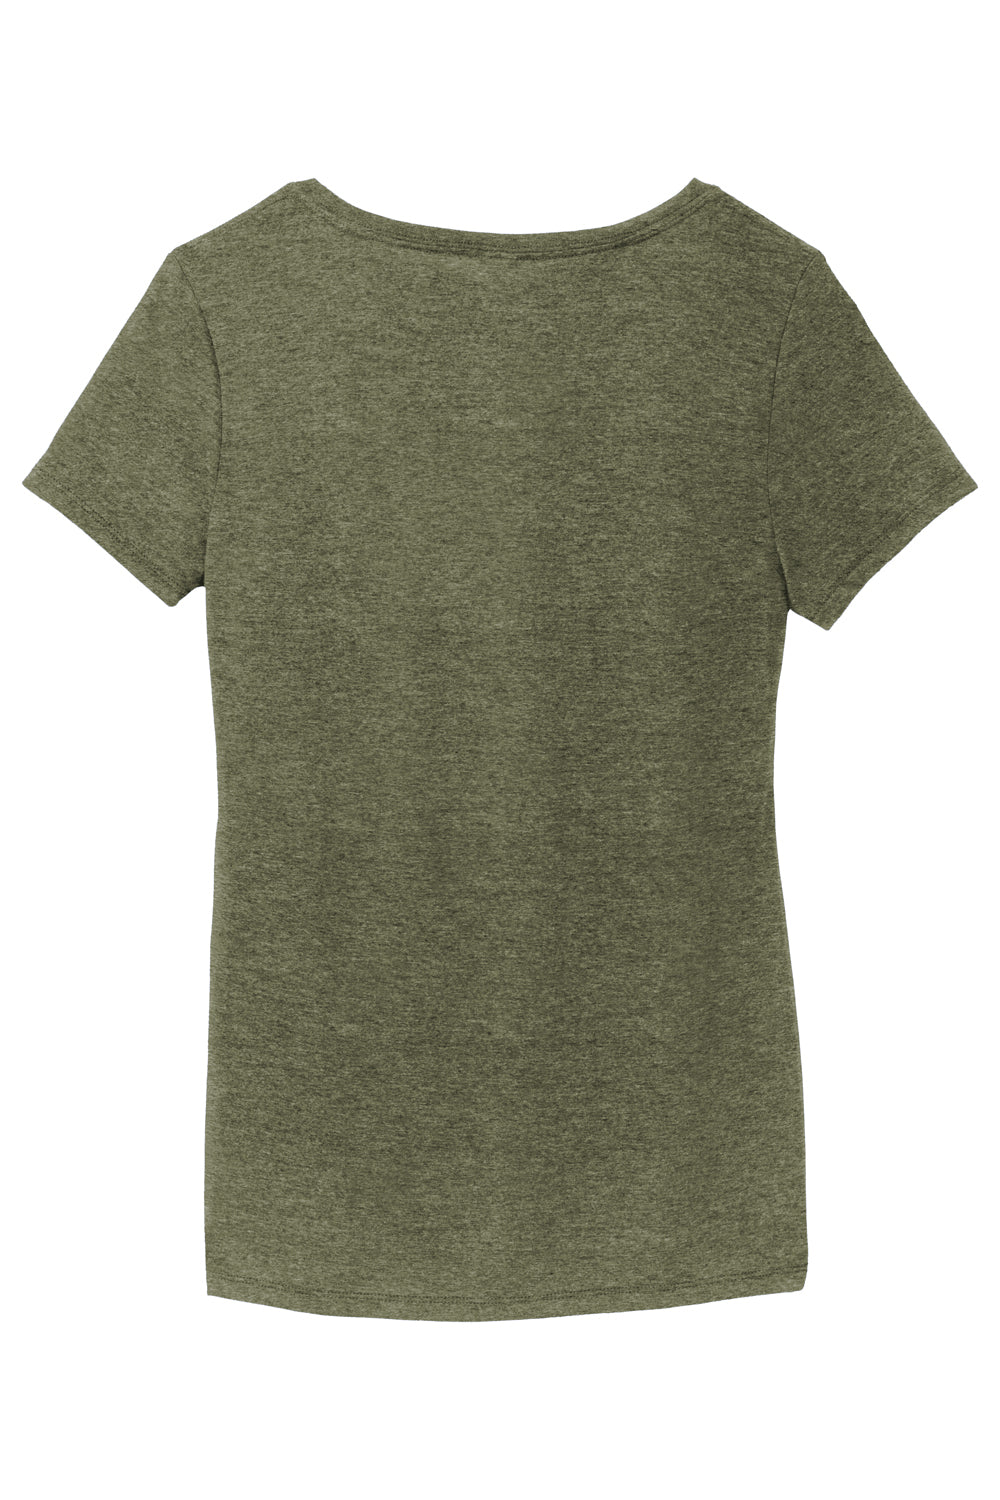 District DM1350L Womens Perfect Tri Short Sleeve V-Neck T-Shirt Military Green Frost Flat Back